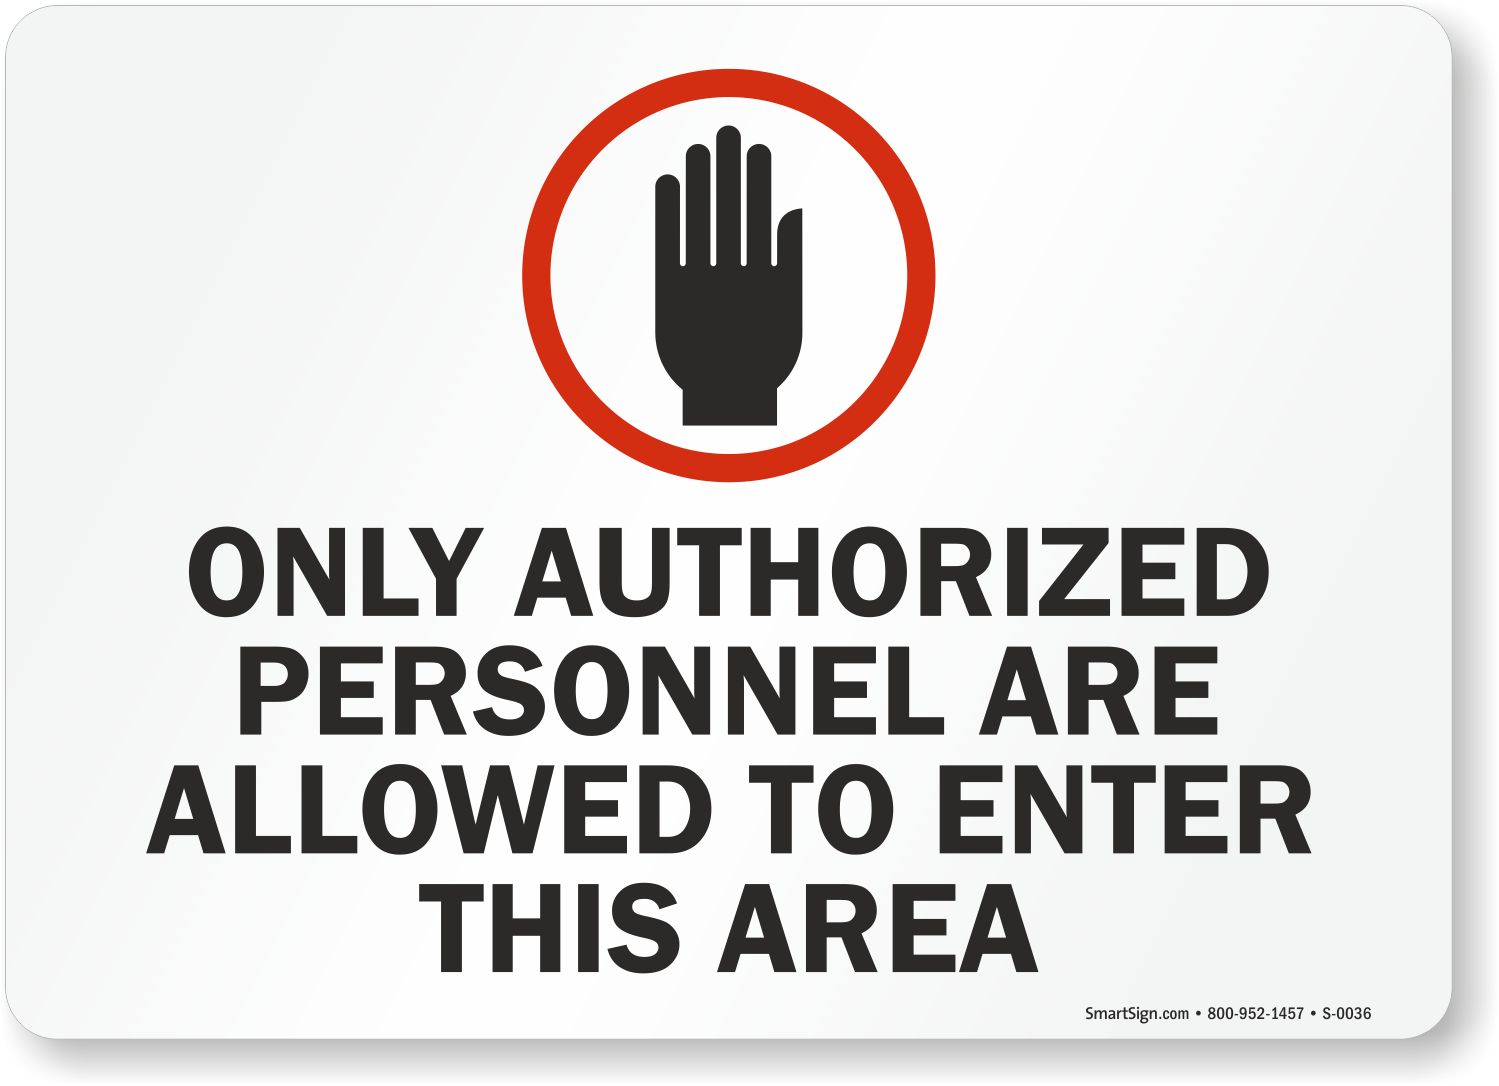 Are you allowed. Be allowed to. Authorized personnel. Authorized only. It s not allowed